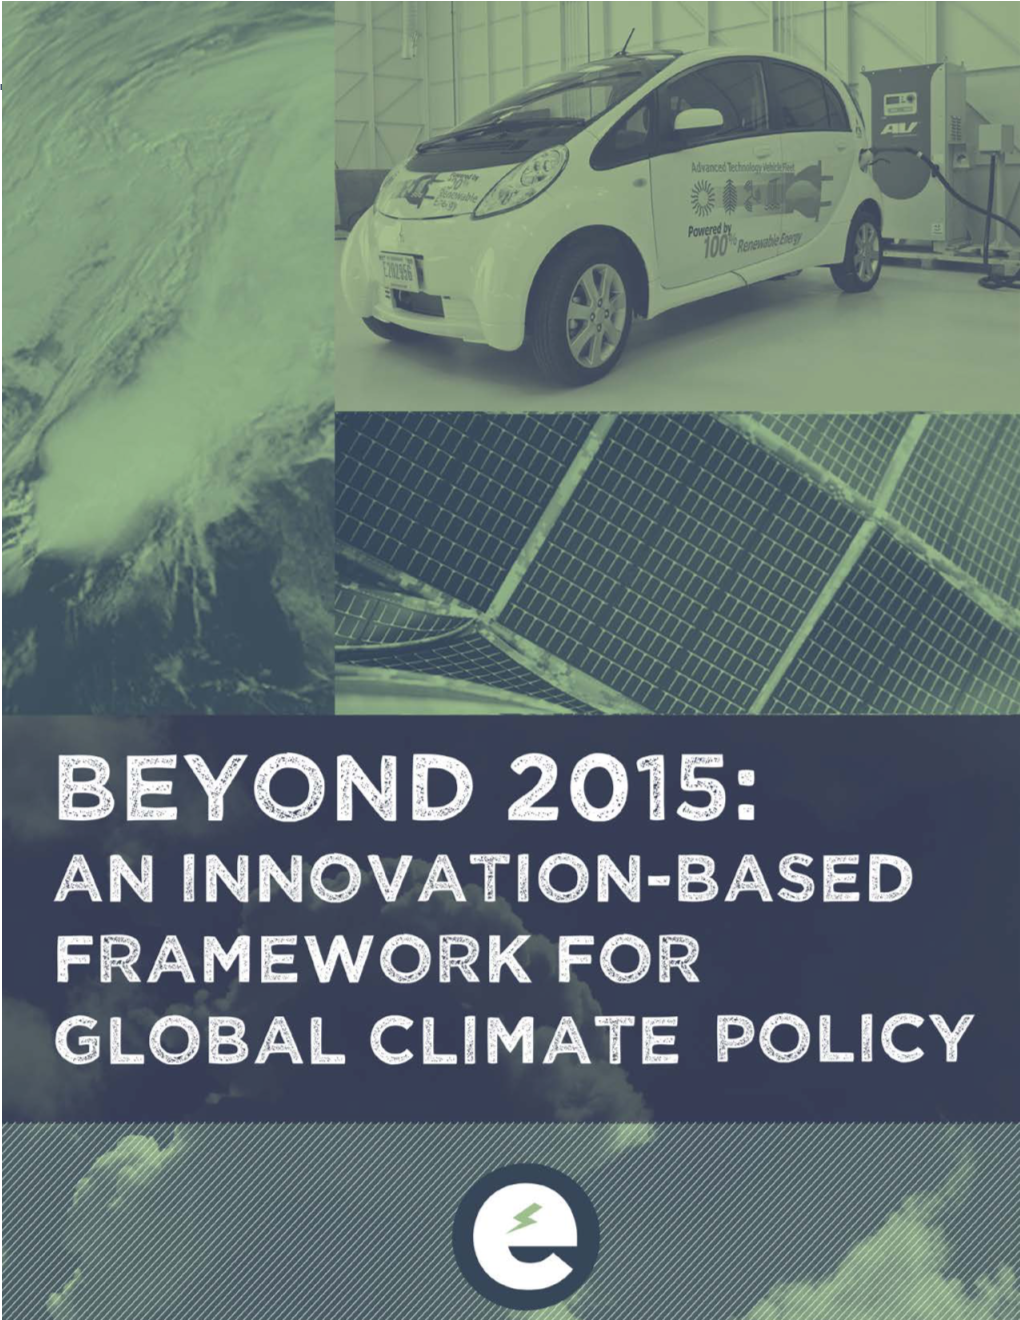 An Innovation-Based Framework for Global Climate Policy